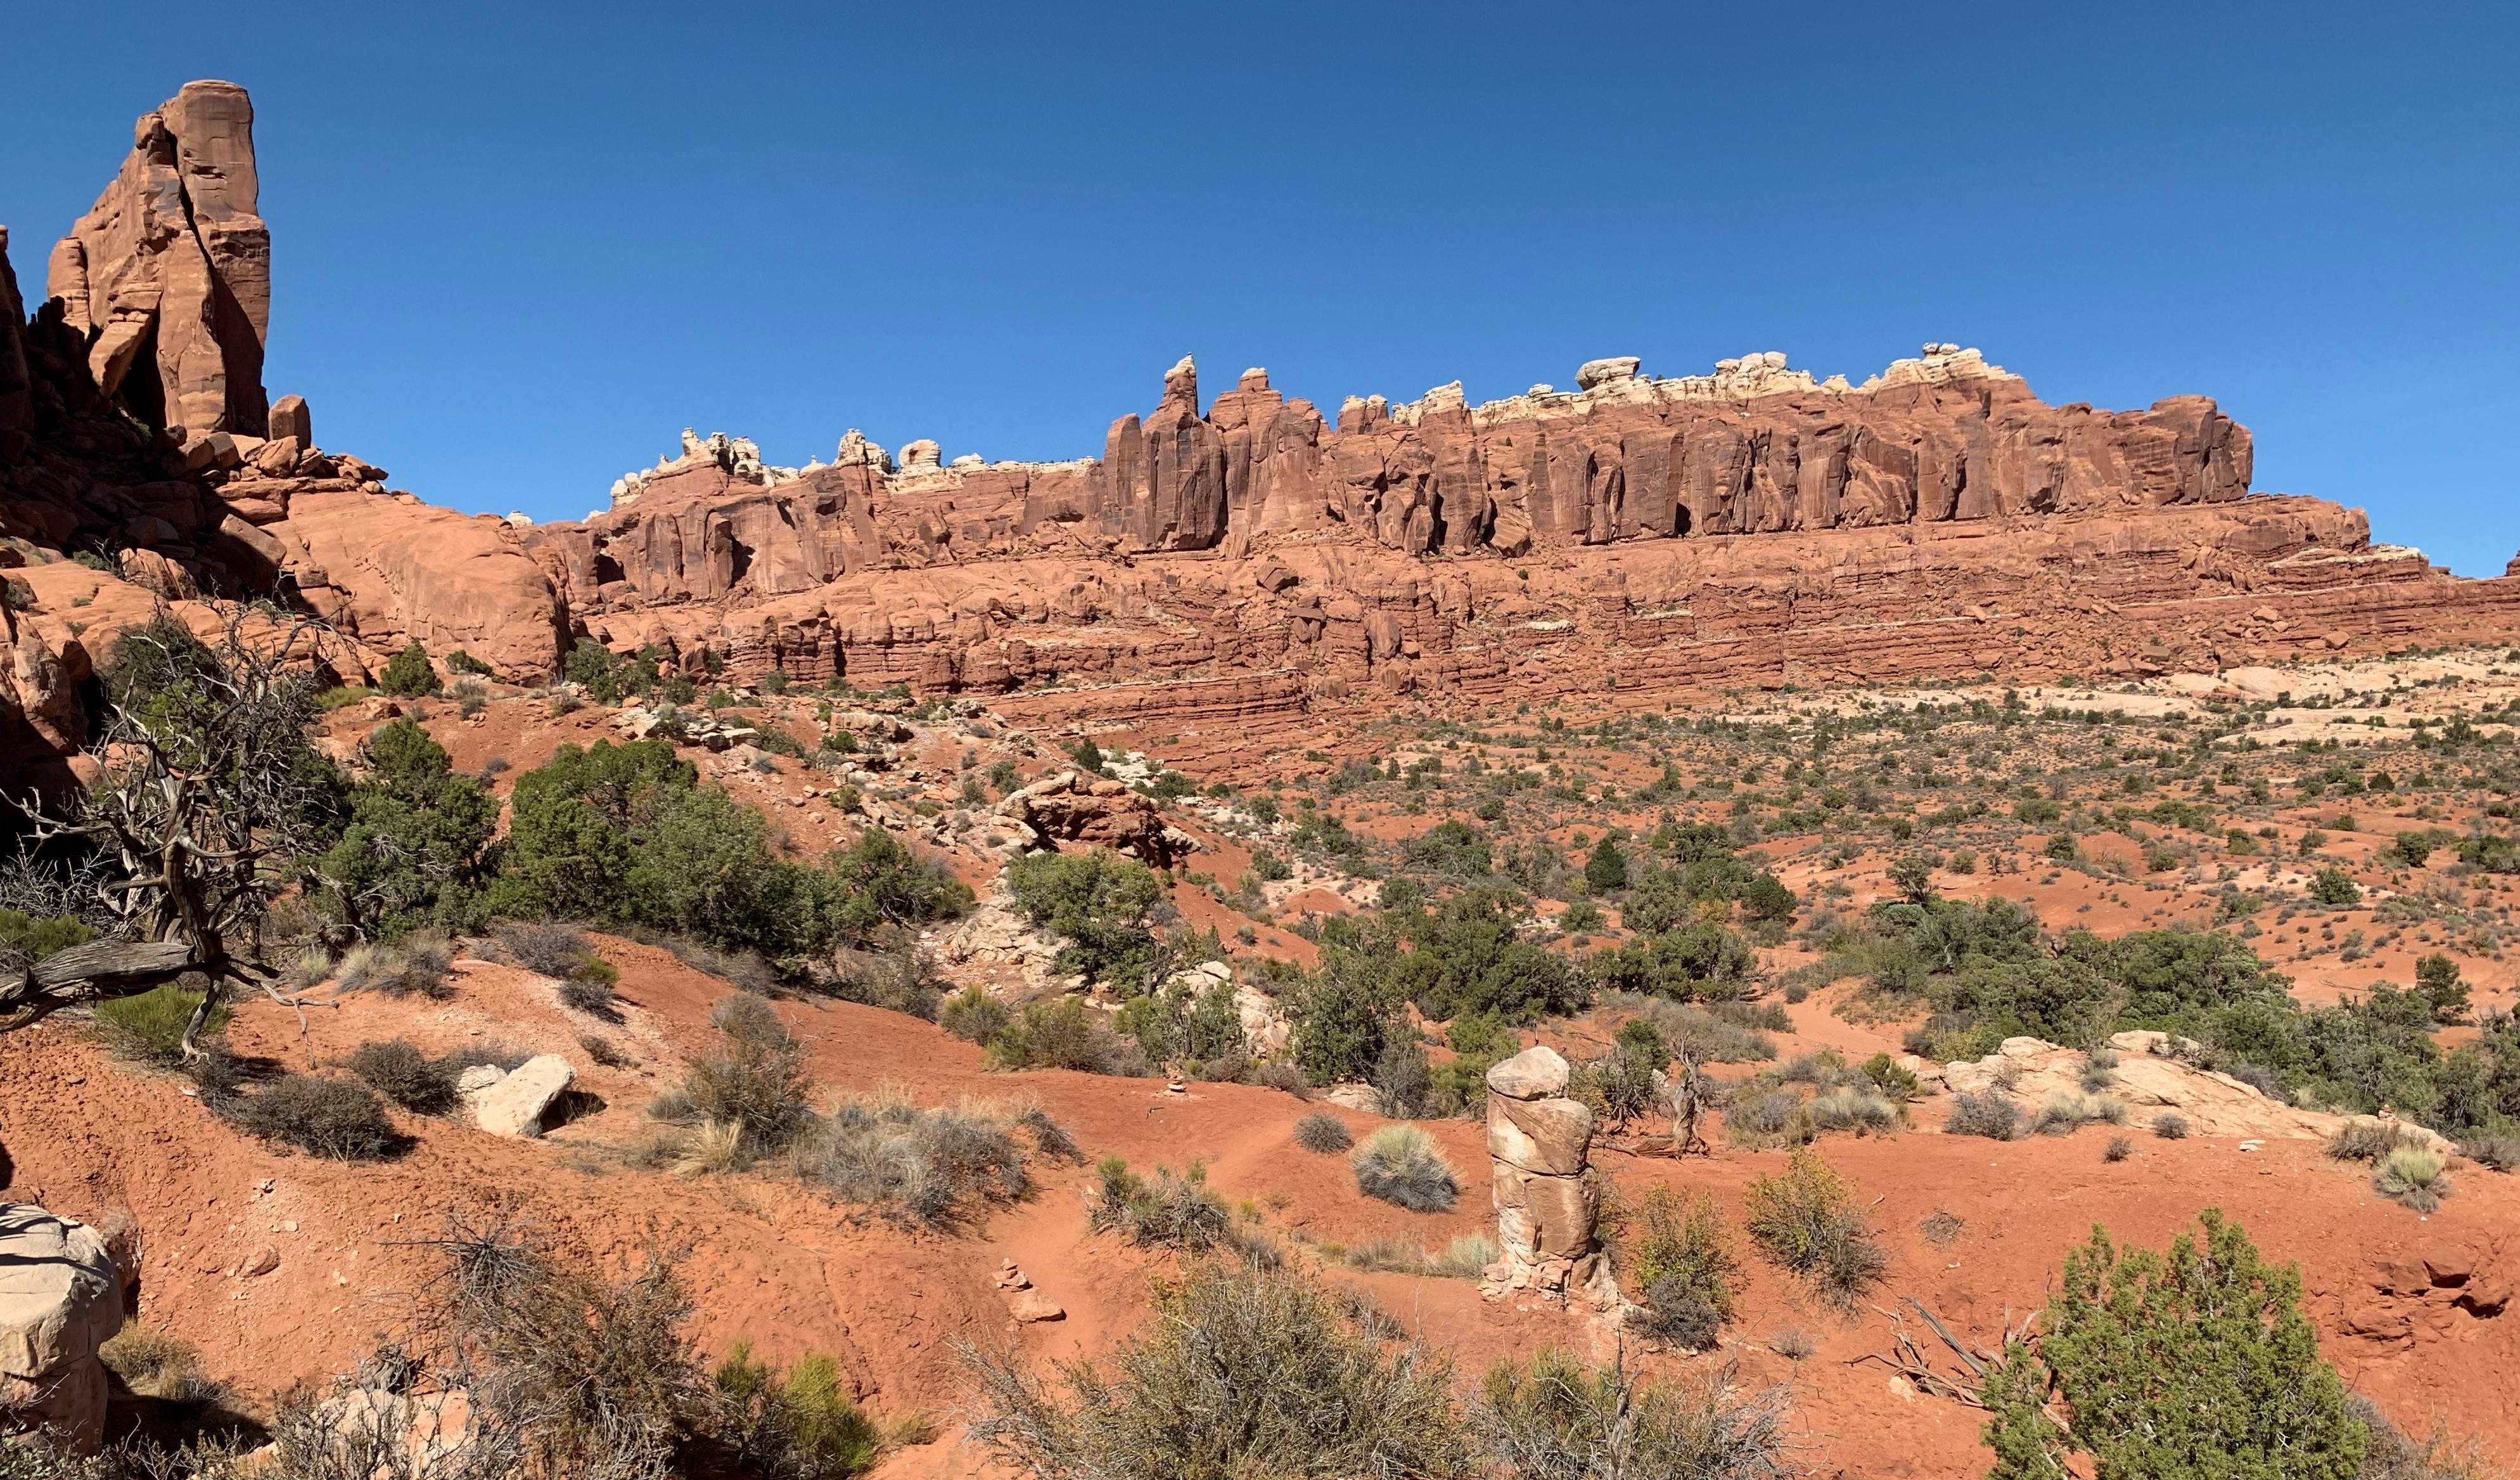 Arches NP